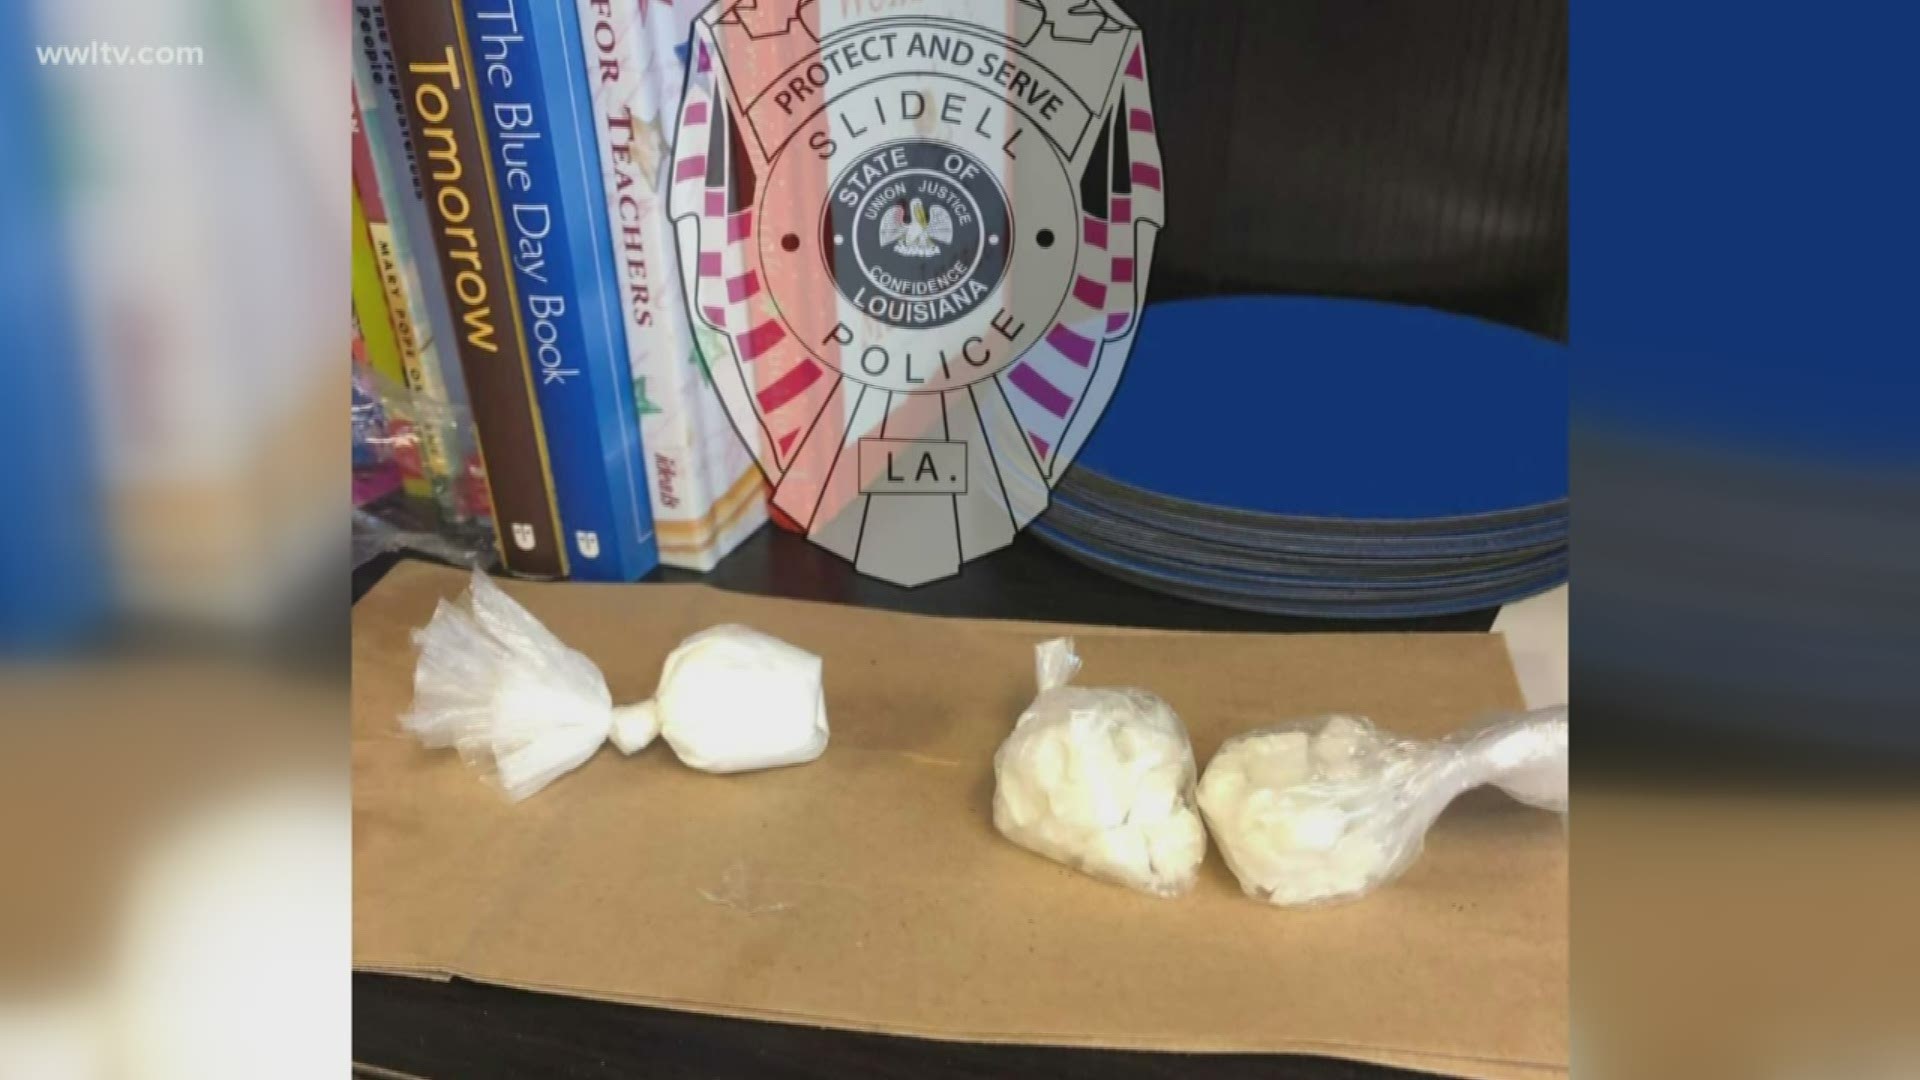 A school resource officer at a Slidell kindergarten was reportedly alerted to the situation when a teacher noticed the 5-year-old had a bag of white powder.